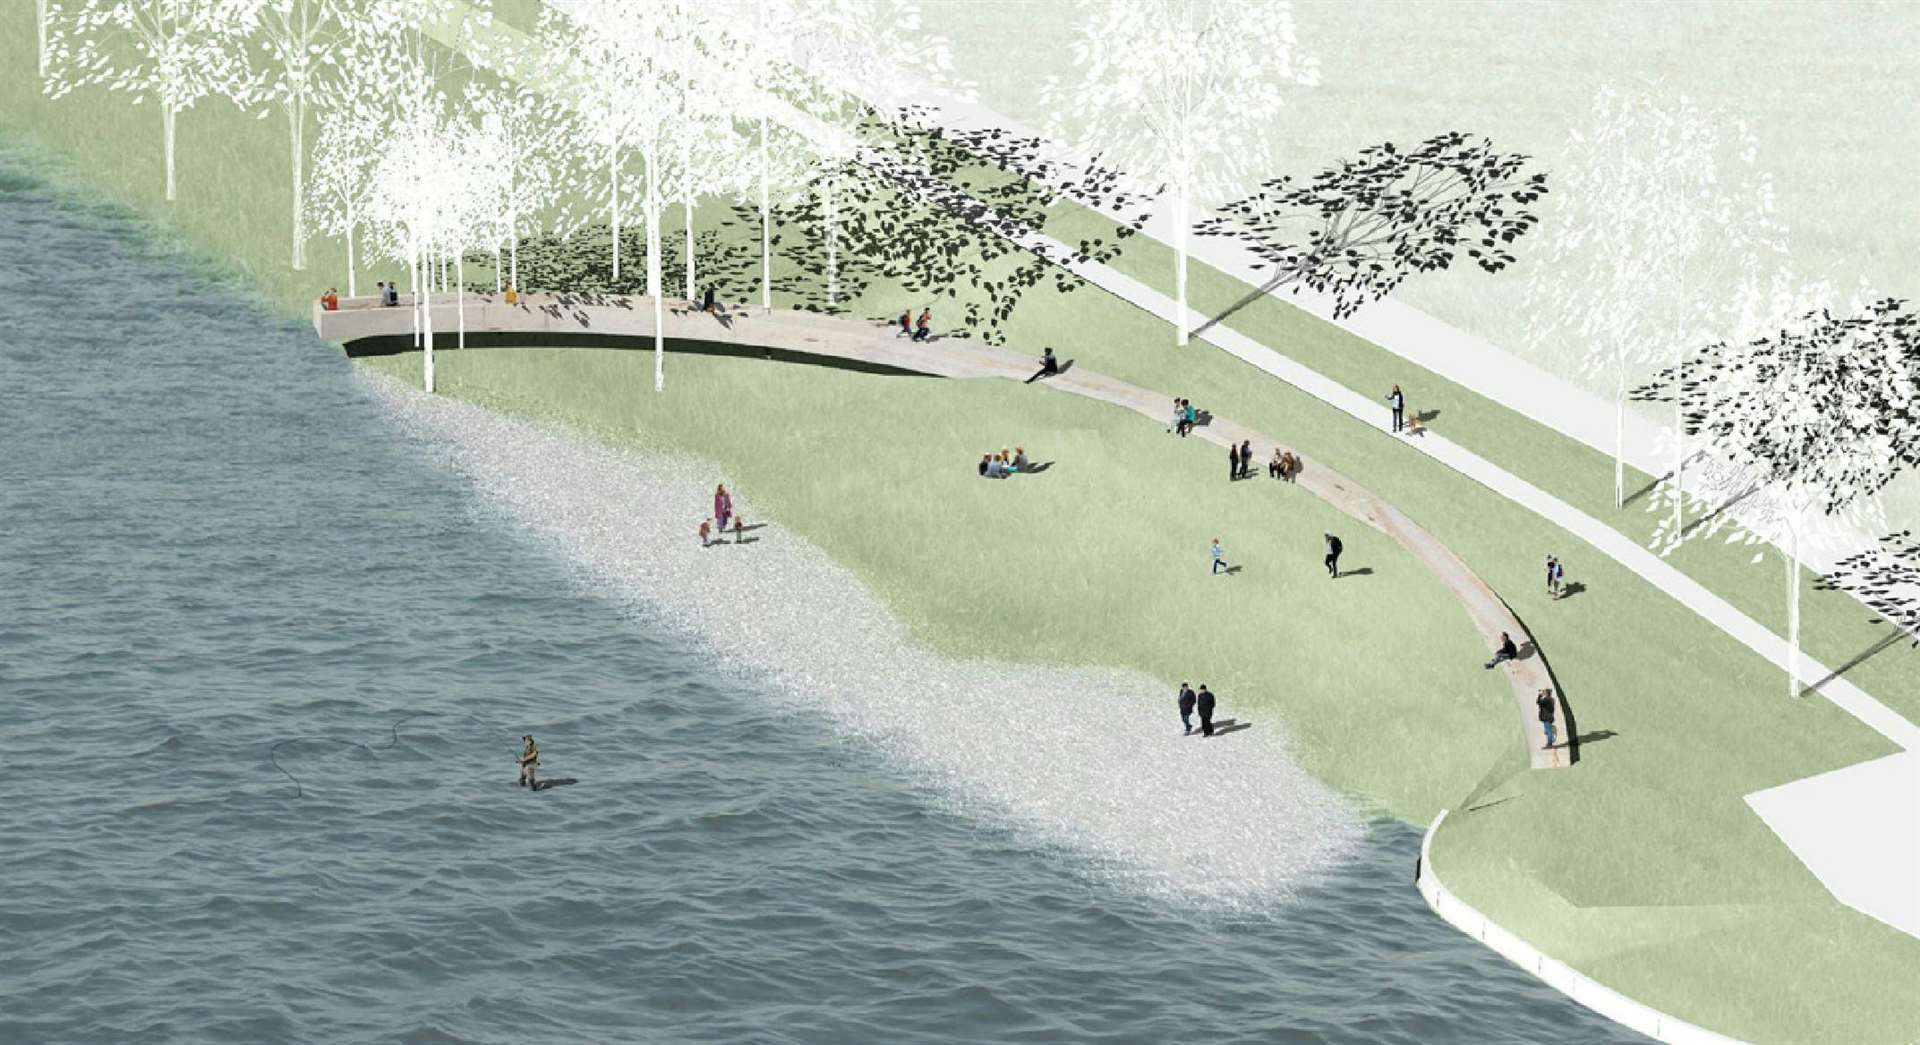 Artist's impression of the My Ness section planned for the Ness Islands bank.